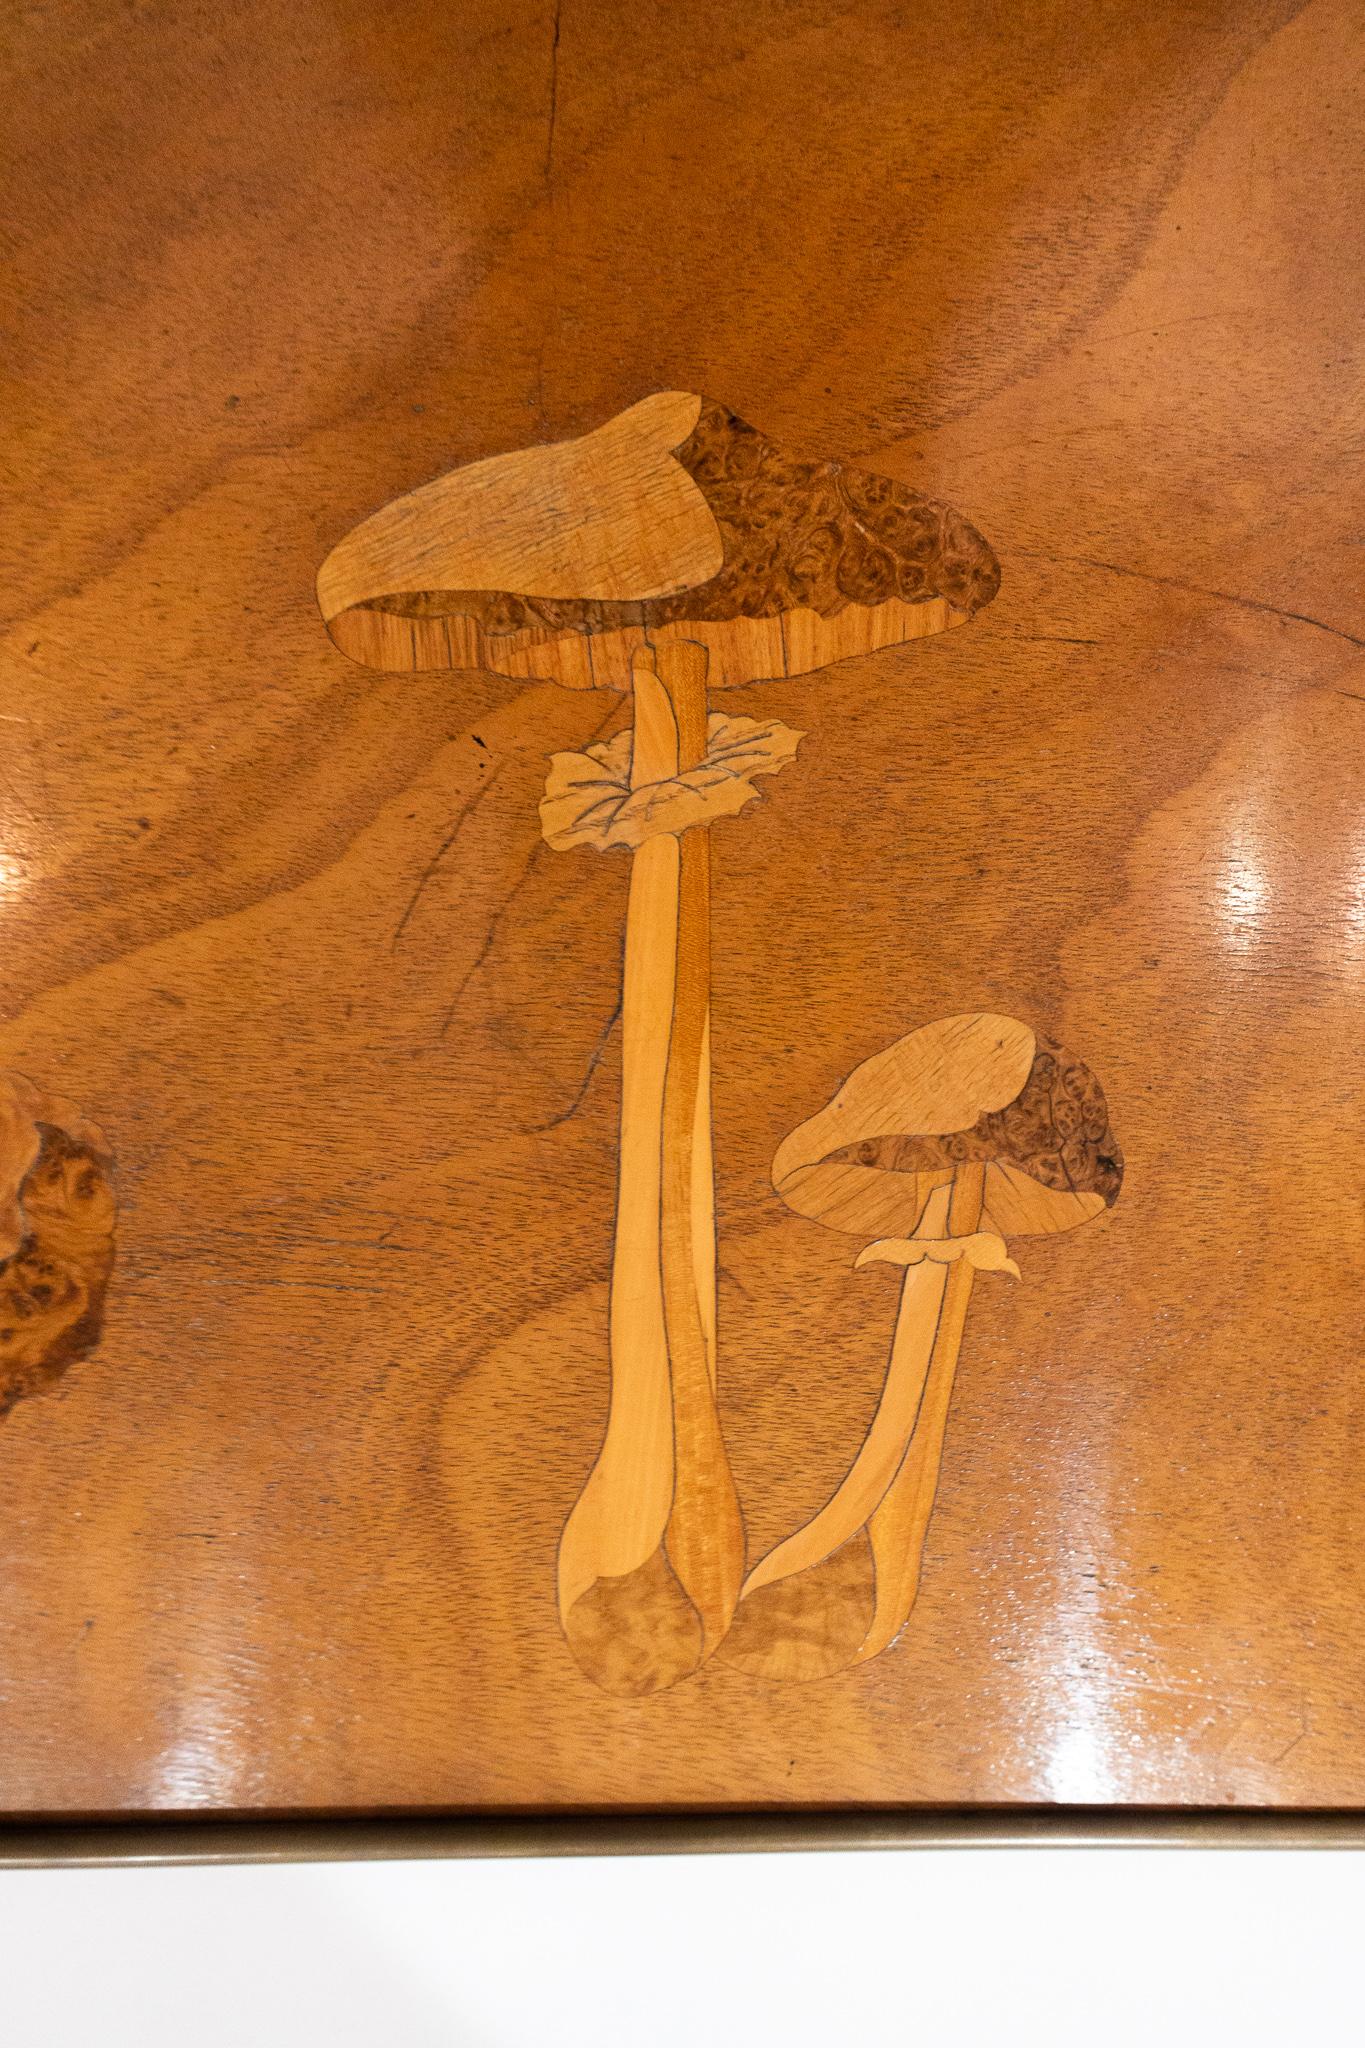 French Inlaid Wooden Panel with Mushrooms and a Butterfly, Signed Christian Dior, Paris